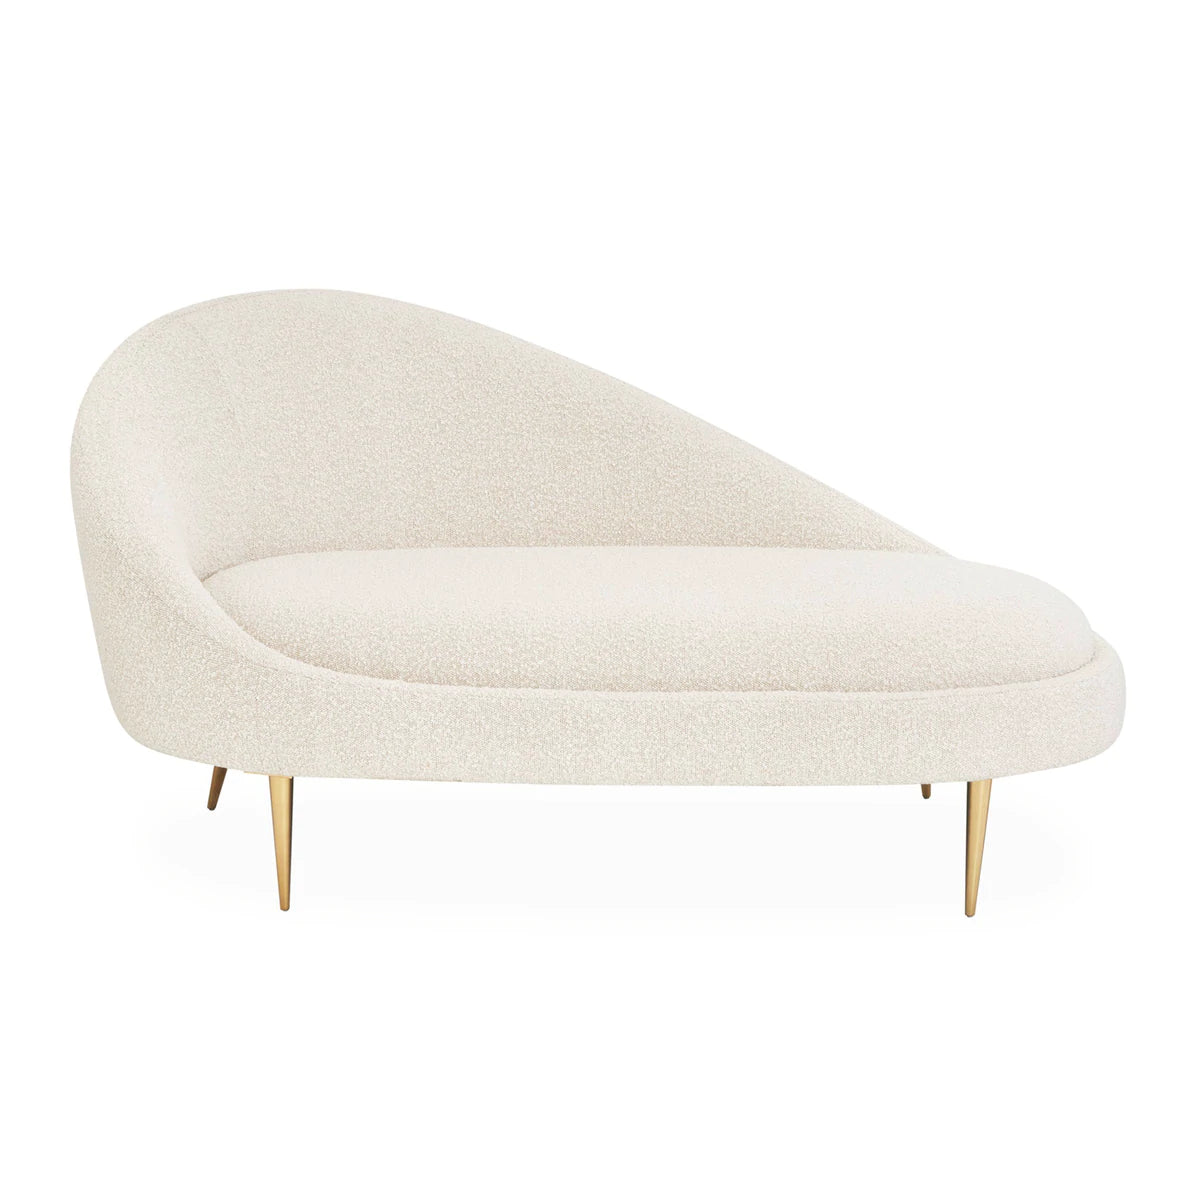 Ether Chaise by Jonathan Adler